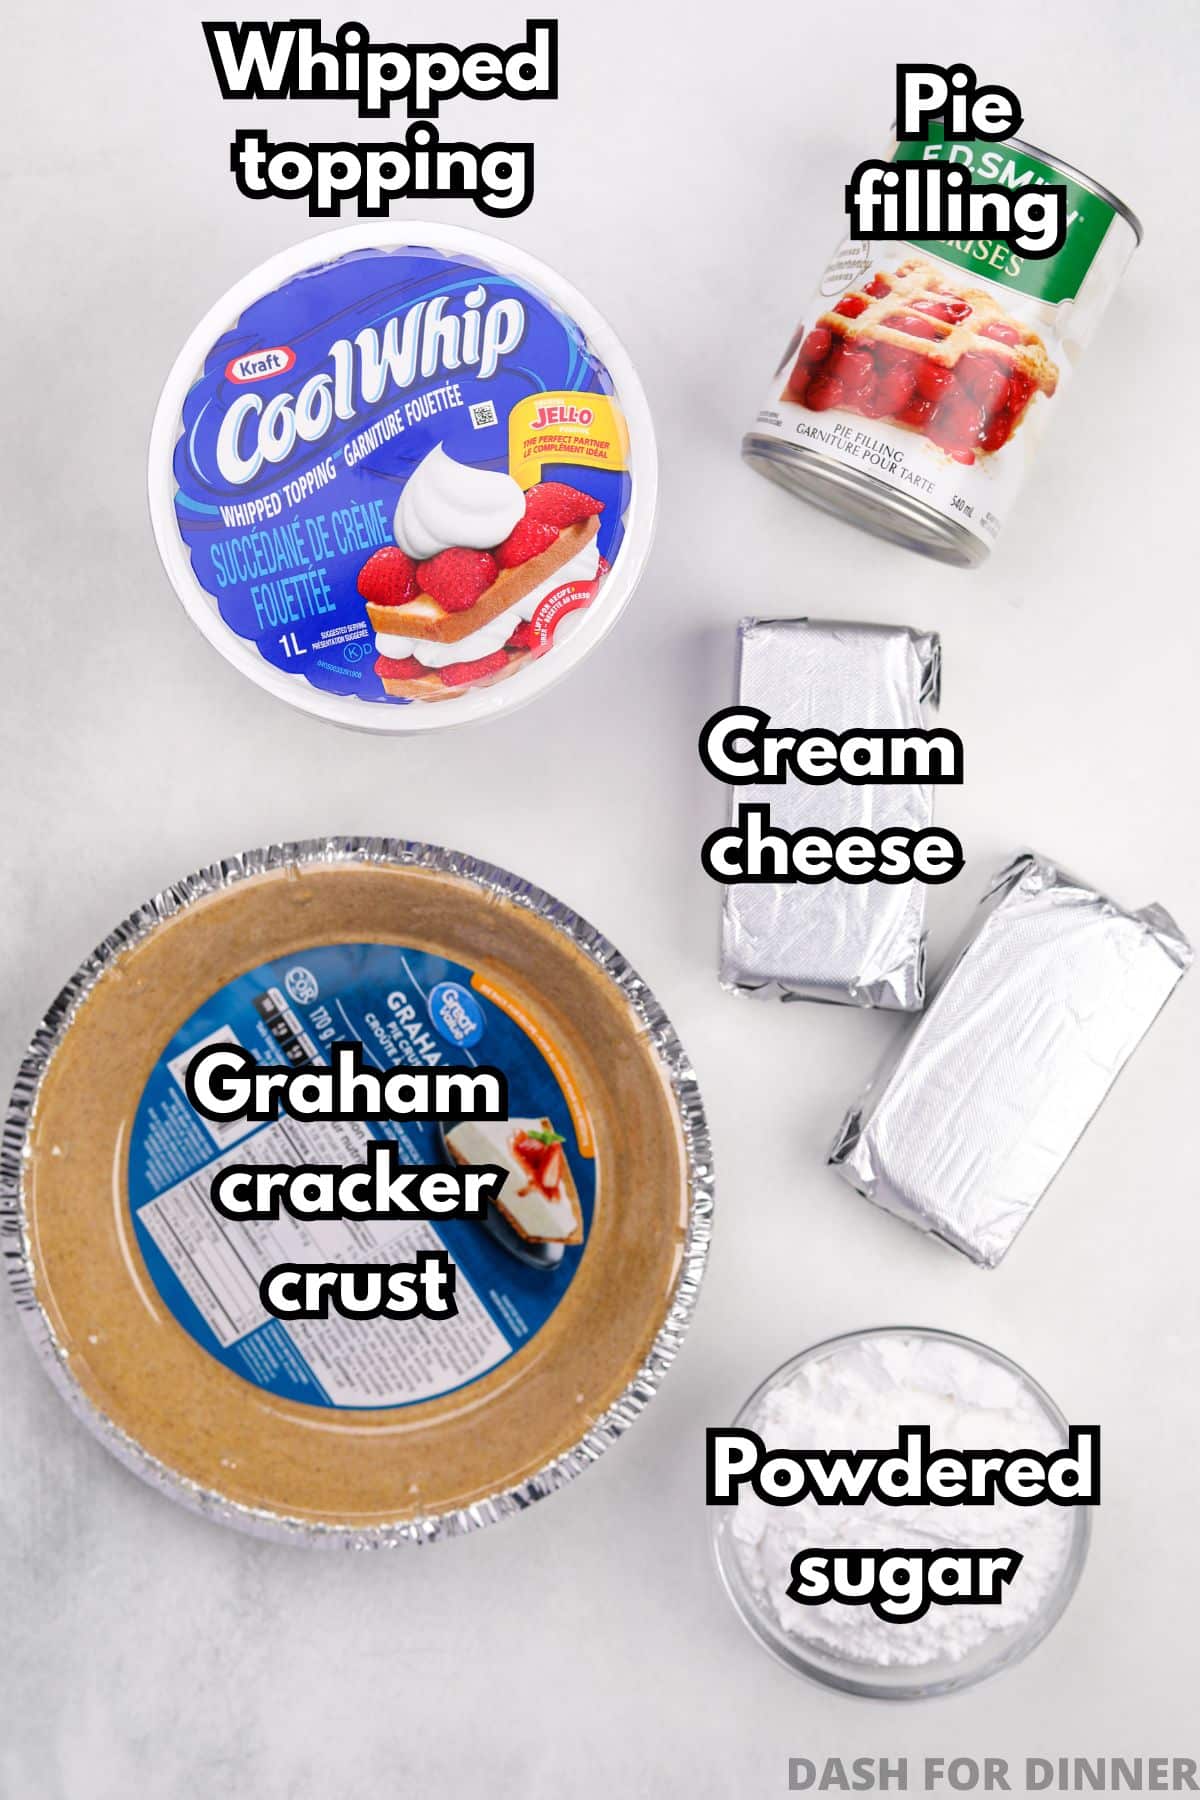 The ingredients needed to make no bake cheesecake: a premade graham cracker crust, cool whip, pie filling, cream cheese, and powdered sugar.